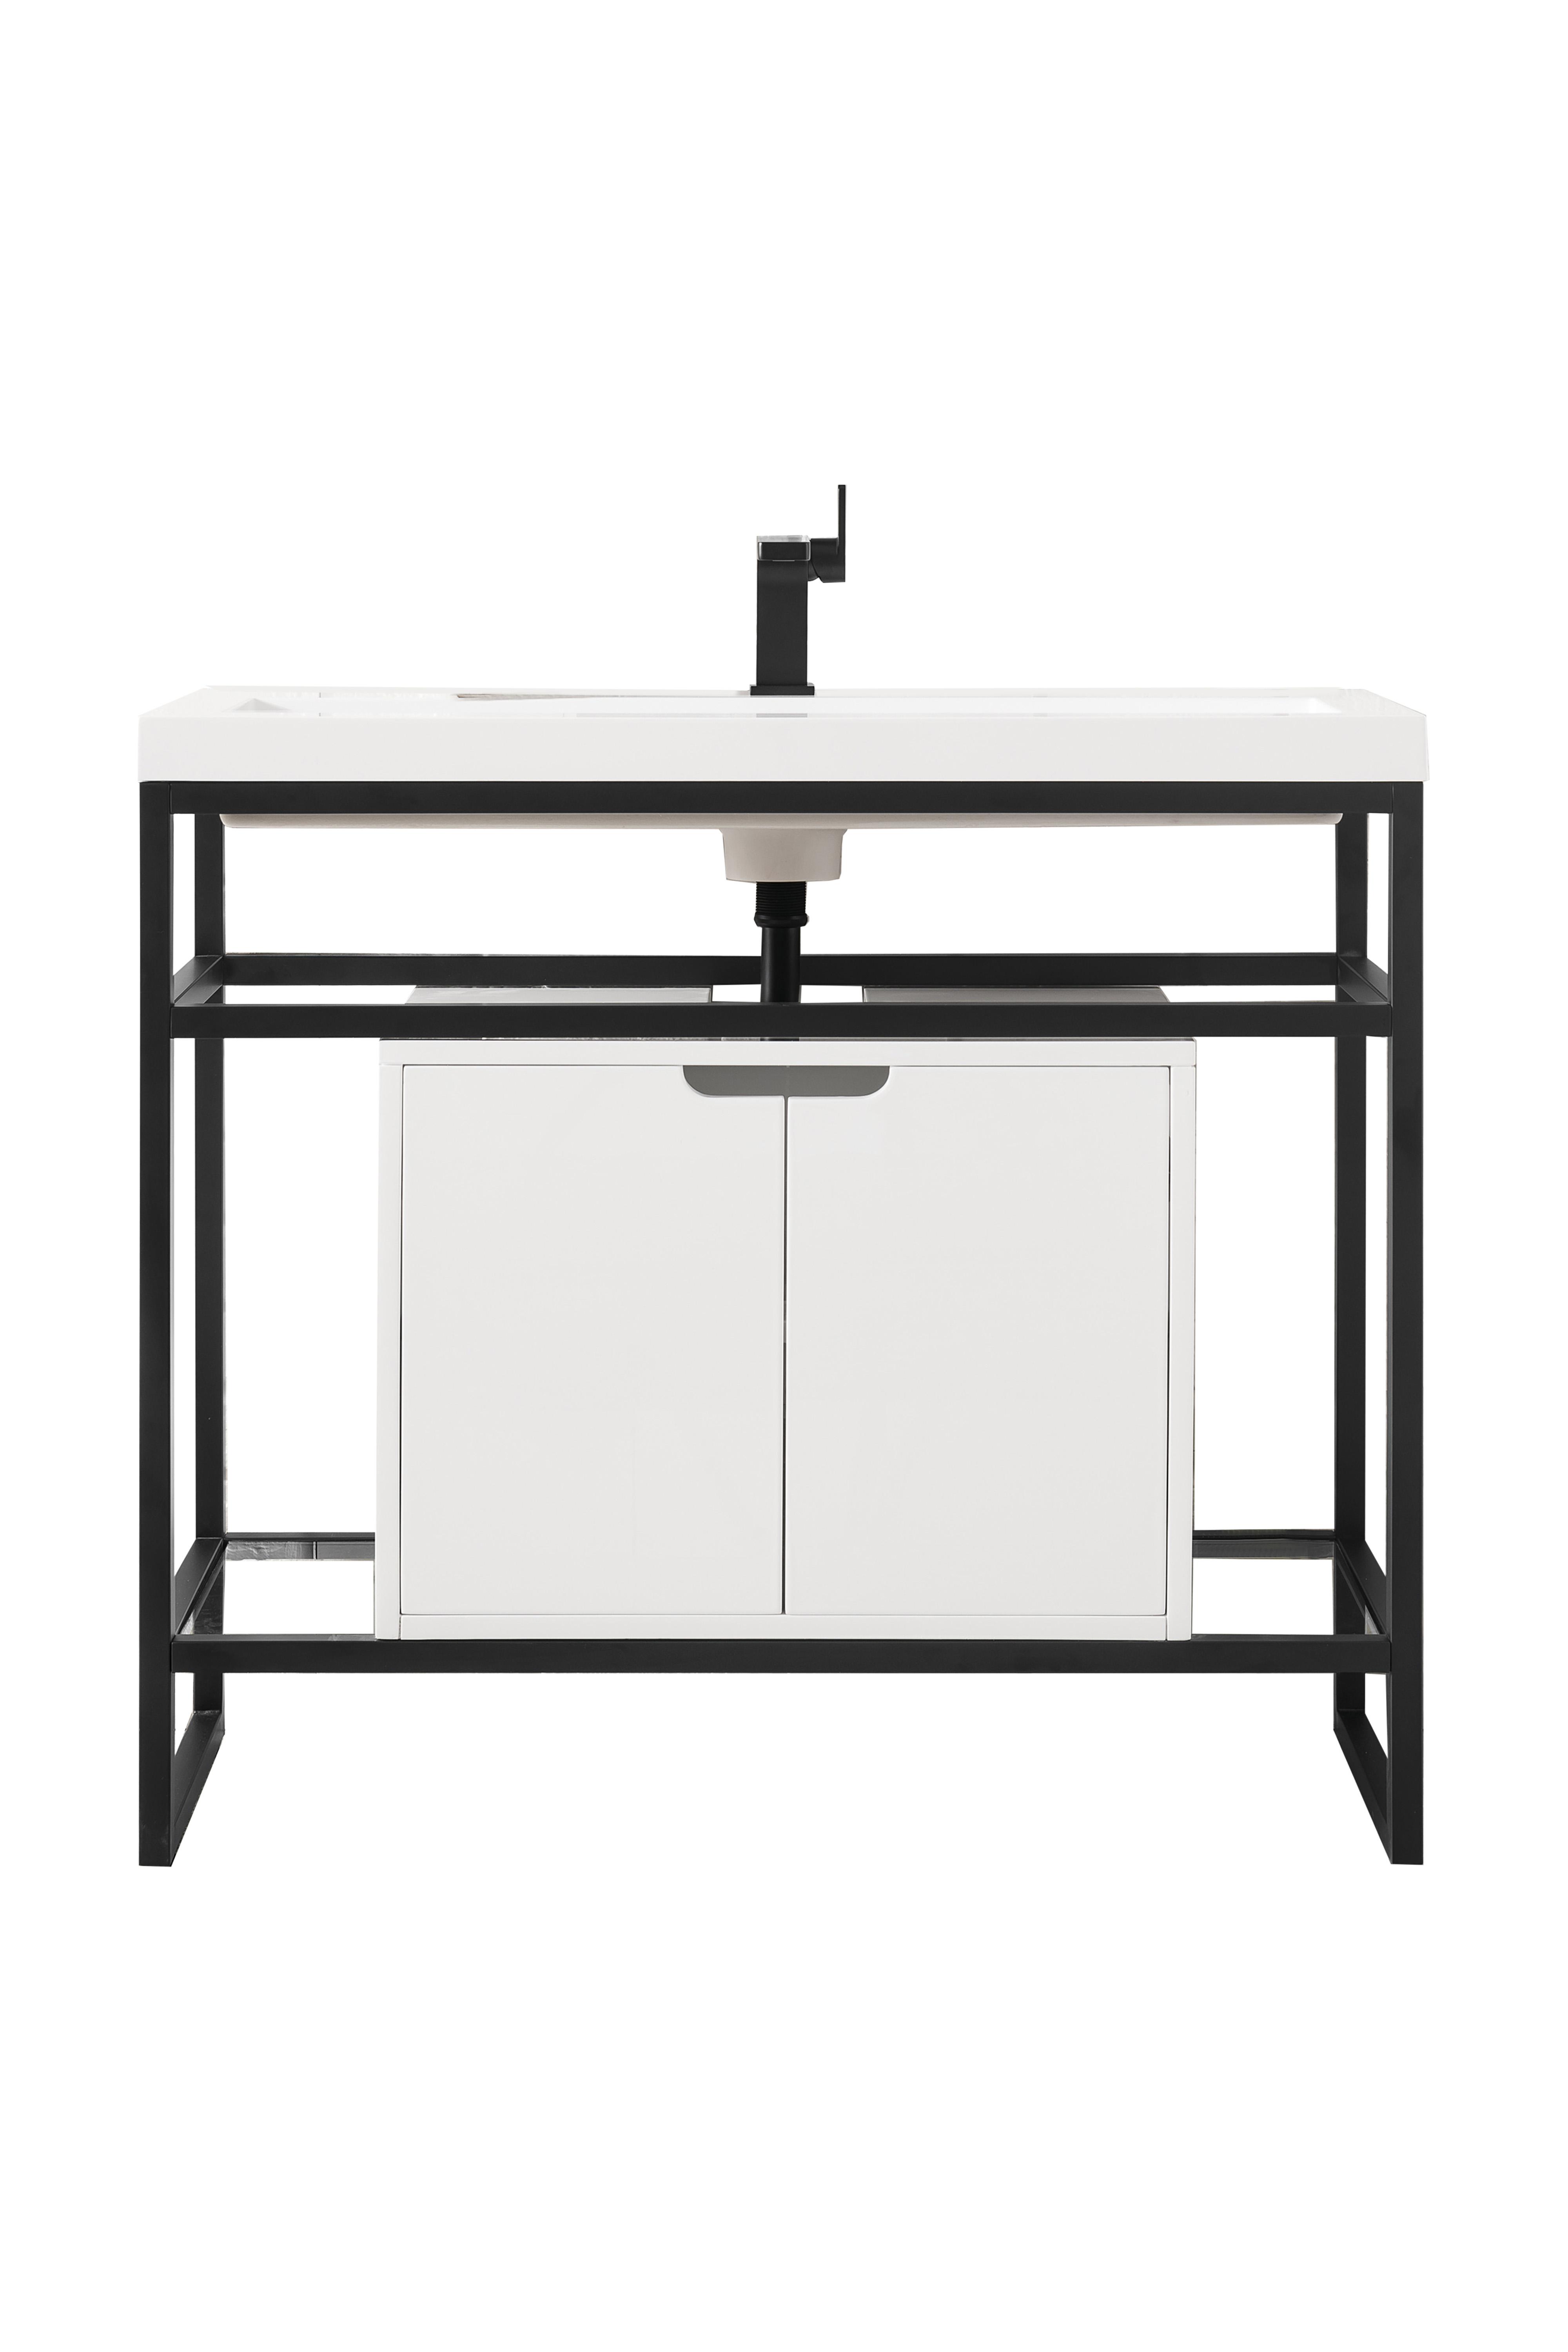 James Martin C105V39.5MBKSCGWWG Boston 39.5" Stainless Steel Sink Console, Matte Black w/ Glossy White Storage Cabinet, White Glossy Composite Countertop